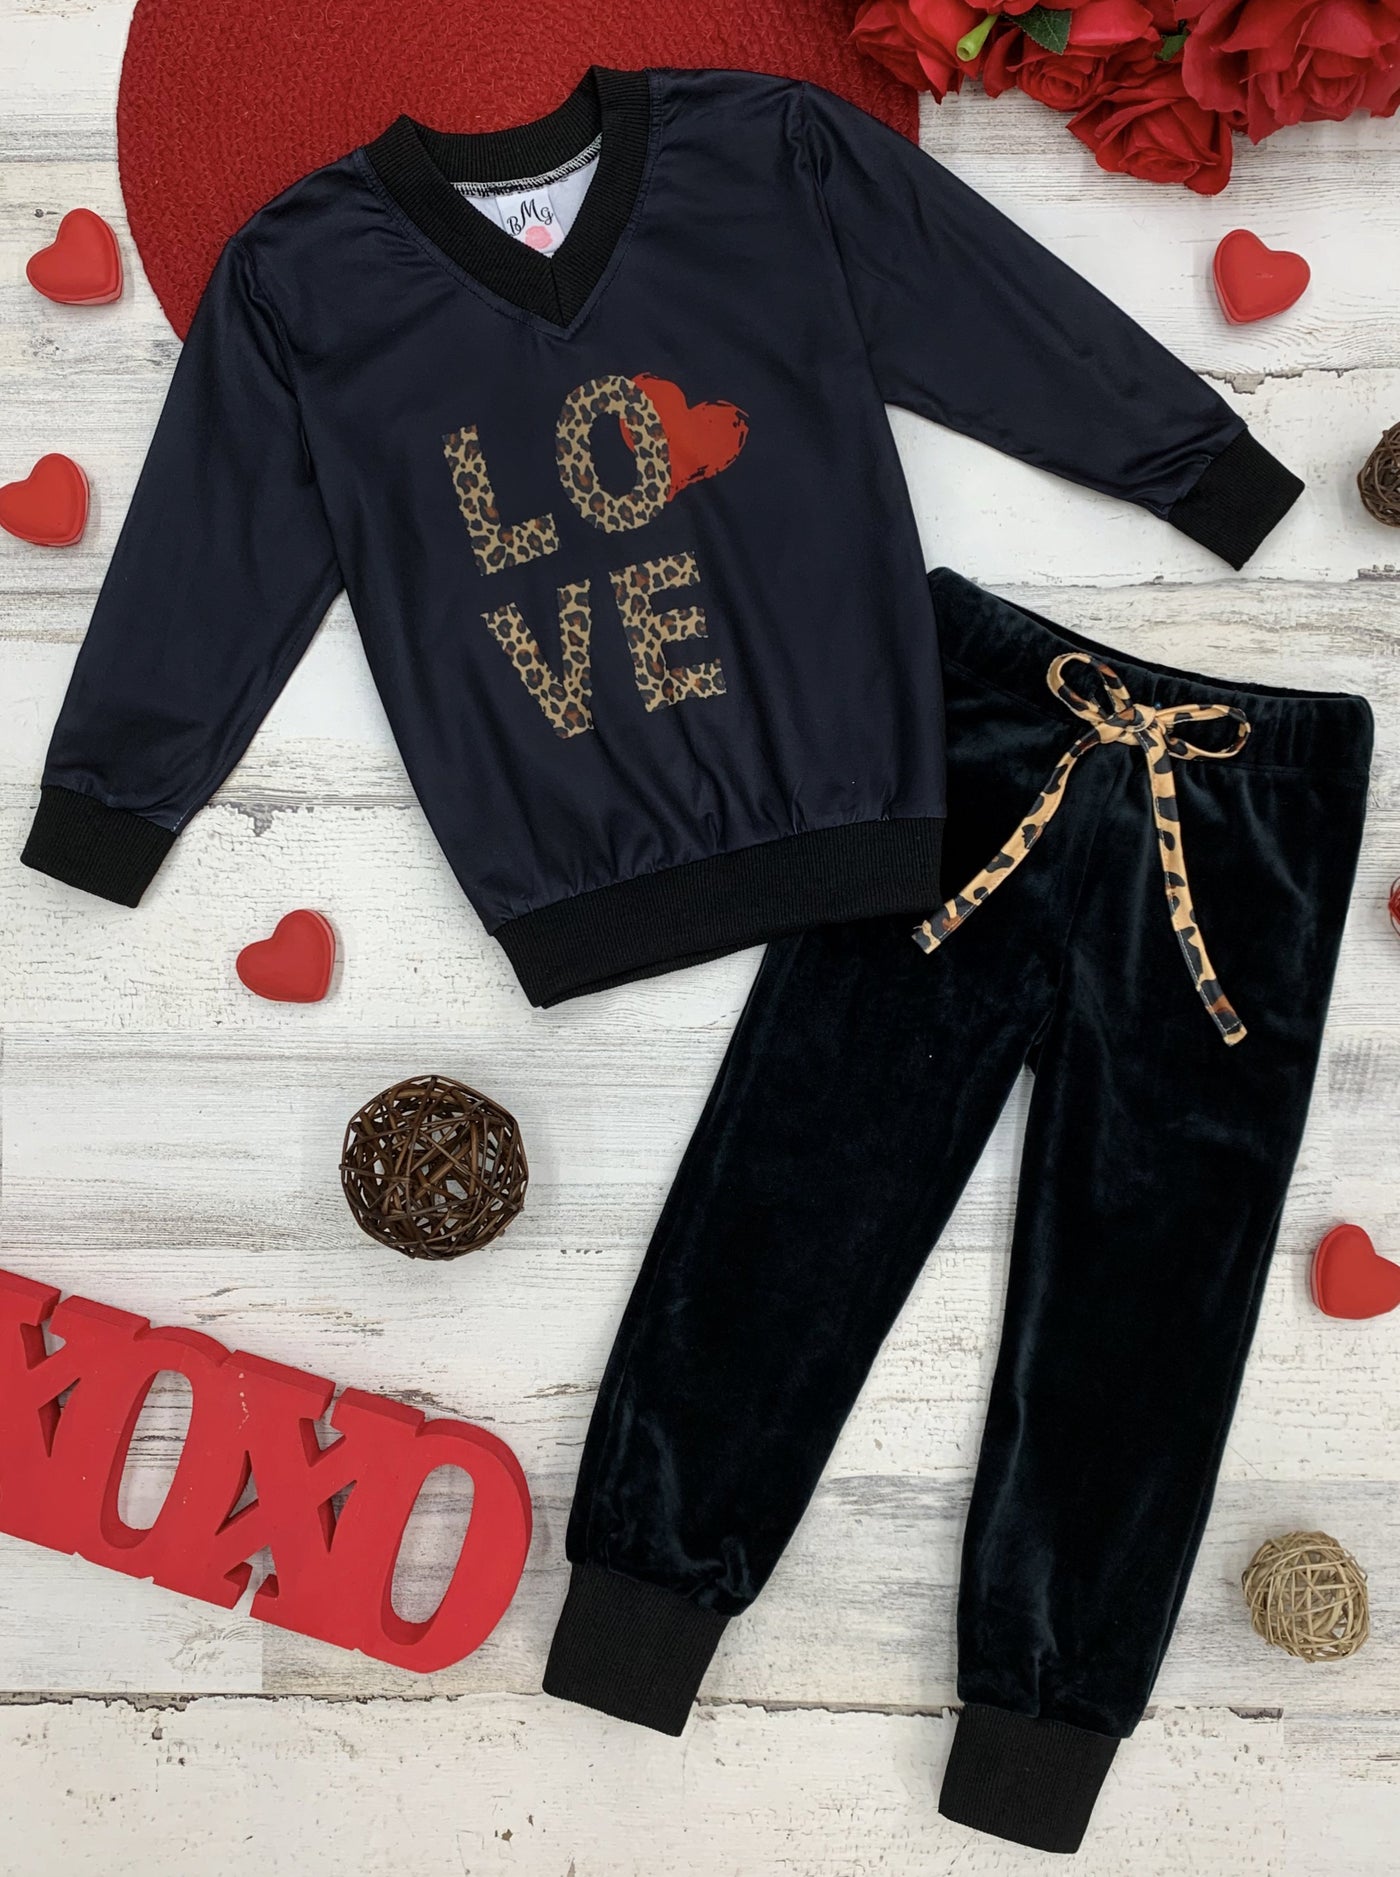 Mommy and me sweater with leopard "Love" print and heart and bottoms with leopard drawstring joggers loungewear